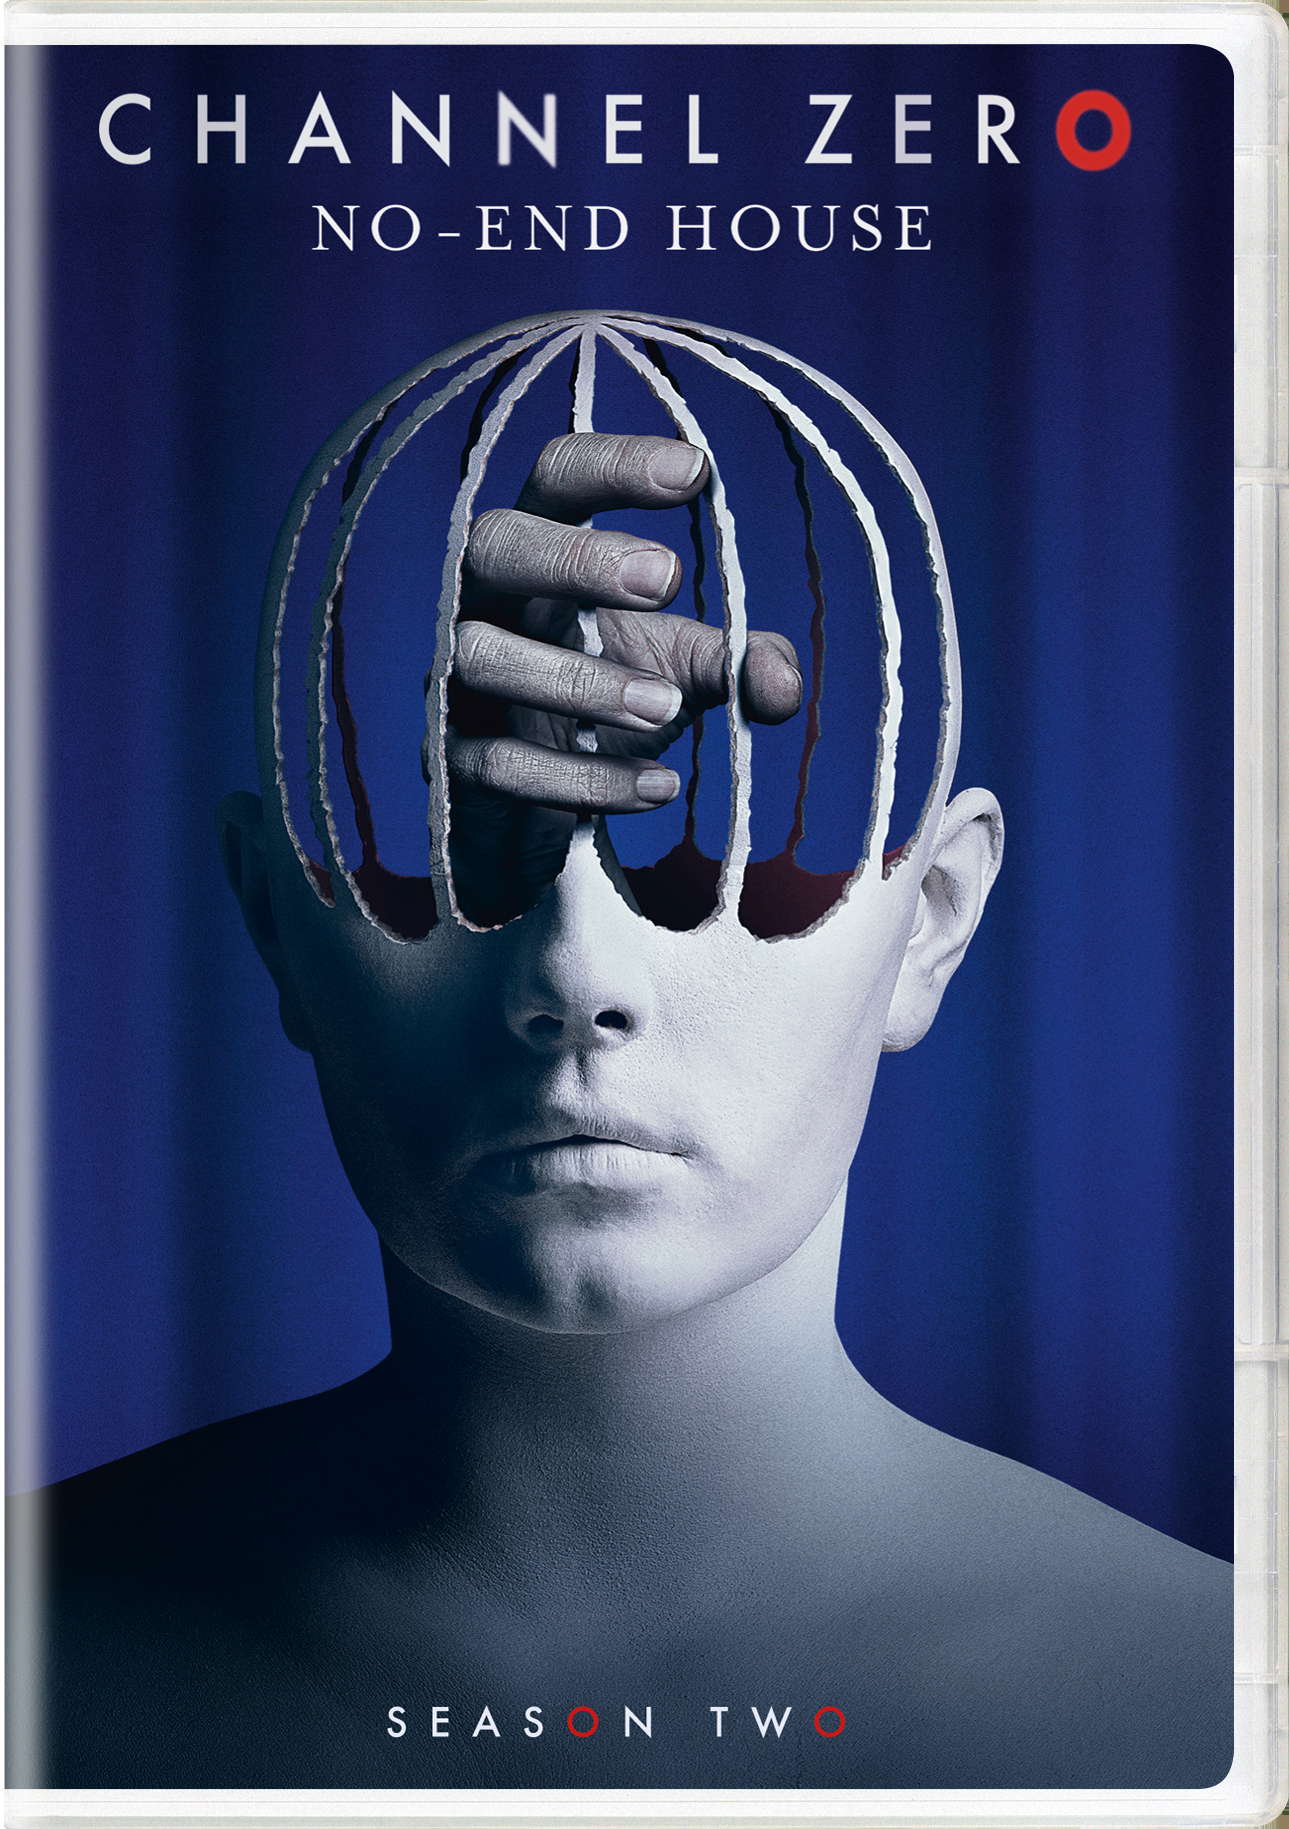 Channel Zero: No-end House - Season Two - DVD   - Drama Television On DVD - TV Shows On GRUV